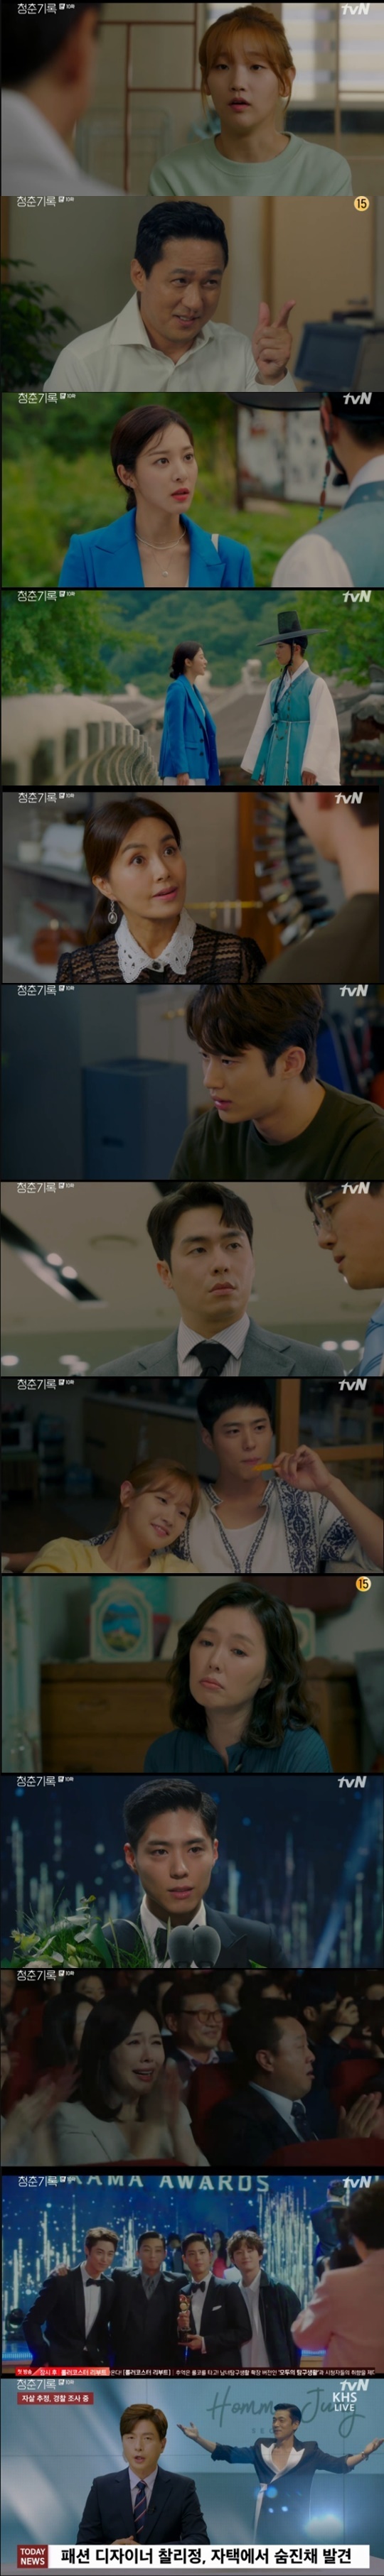 Park Bo-gum shocked by news of Lee Seung-juns deathIn the 10th episode of TVNs Monday drama Record of Youth (director Ahn Gil-ho, playwright Ha Myung-hee), which aired on October 6, Sa Hye-joon (Park Bo-gum) was shown to be anxious even though he became a star.On this day, Seungjo (Son Chang-min) offered Ahn an envelope of money, saying, Ill tell you why I came to see you. Seungjo said, Its money I collected for you when you get married. Father draws again.I have been drawing a picture for a while and I have not told you.  I want to show you why I painted Father.Ive lost your childhood, but I want to be remembered as a good person for you. Instead of selling a stable house, I decided to open a makeup shop with the money my father gave me.Jung Jia (Sul In-ah) called Hye-joon and said, I want to go somewhere to play, saying, The test is over. Hye-joon said, Im filming. Then hung up.Jia visited Hyejuns historical drama and introduced the staff to Hyejuns Friend and Law School graduation.When Hye-joon said that he knew about himself, Jia suggested, Do not say that, you are excited, and Lets do a friend.Hye-joon refused, I can not be friends with you.When he heard the nagging from his parents and met him at the shop, he said, Hello, sir. Haehyo asked, Do you think Im a customer?When Jeong said warmly, I think you will be angry no matter what I do, I want to be angry with me, I do not feel good. Haehyo smiled, I feel better.When the company mentioned the bad rumors about Sa Hye-joon, Sa Kyung-joon (Lee Jae-won) was angry, Why do you show me this?After finishing the local filming, Sa Hye-joon came up and ran to the house of Ahn Jung-ha first. Lee Min-jae (Shin Dong-mi) told Sa Hye-joon, Do not hug and take such a picture.I will be careful, but when I write, I will be hard to decide. However, Sa Hye-joon was caught in the paparazzi as he entered the house of Ahn Jung-ha.I asked Sa Hye-joon, who is stable, how does it feel these days? I feel uneasy. I search my name a few times a day.What if someone goes to shop and goes down? Someone is nervous because someone is worried about being screwed. There is a need for anxiety.Ill think positively.When asked about the rumors, he asked, Do you know Charlie Jung-jun? and Sa Hye-jun said, Ive been wearing a lot of her clothes.You went to Sams Club? Kyung-joon shouted, Did I have time to go to Sams Club? I didnt have time to go to Sams Club.When Samingi (Han Jin-hee) also said, Why do you bother a busy child? Kyung-joon said, Oh my days have gone, and the power structure of this family is changing.In the acting contest, Sa Hye-joon won the Grand Prize. Until a year ago, I was an unnamed Actor student and an alba student.Thank you for believing and supporting me to the end, my dear mother, and my fan Sams Club.Jin-woo (Kwon Soo-hyun) encouraged Hae-hyo, who was disappointed because she did not receive the Rookie of the Year award, saying, You skip all the way like Hye-joon and get the Grand Prize.When the family returned from the awards ceremony, Sa Kyung-joon gave Hye-joon a pin-jack saying, Why did you take Father out of the award testimonial?Thank you, I can not say this, he said. Do you like to love publicly? So Ae Sook said, I was drunk, I love you.I do not envy anything in the world because my child is good. 